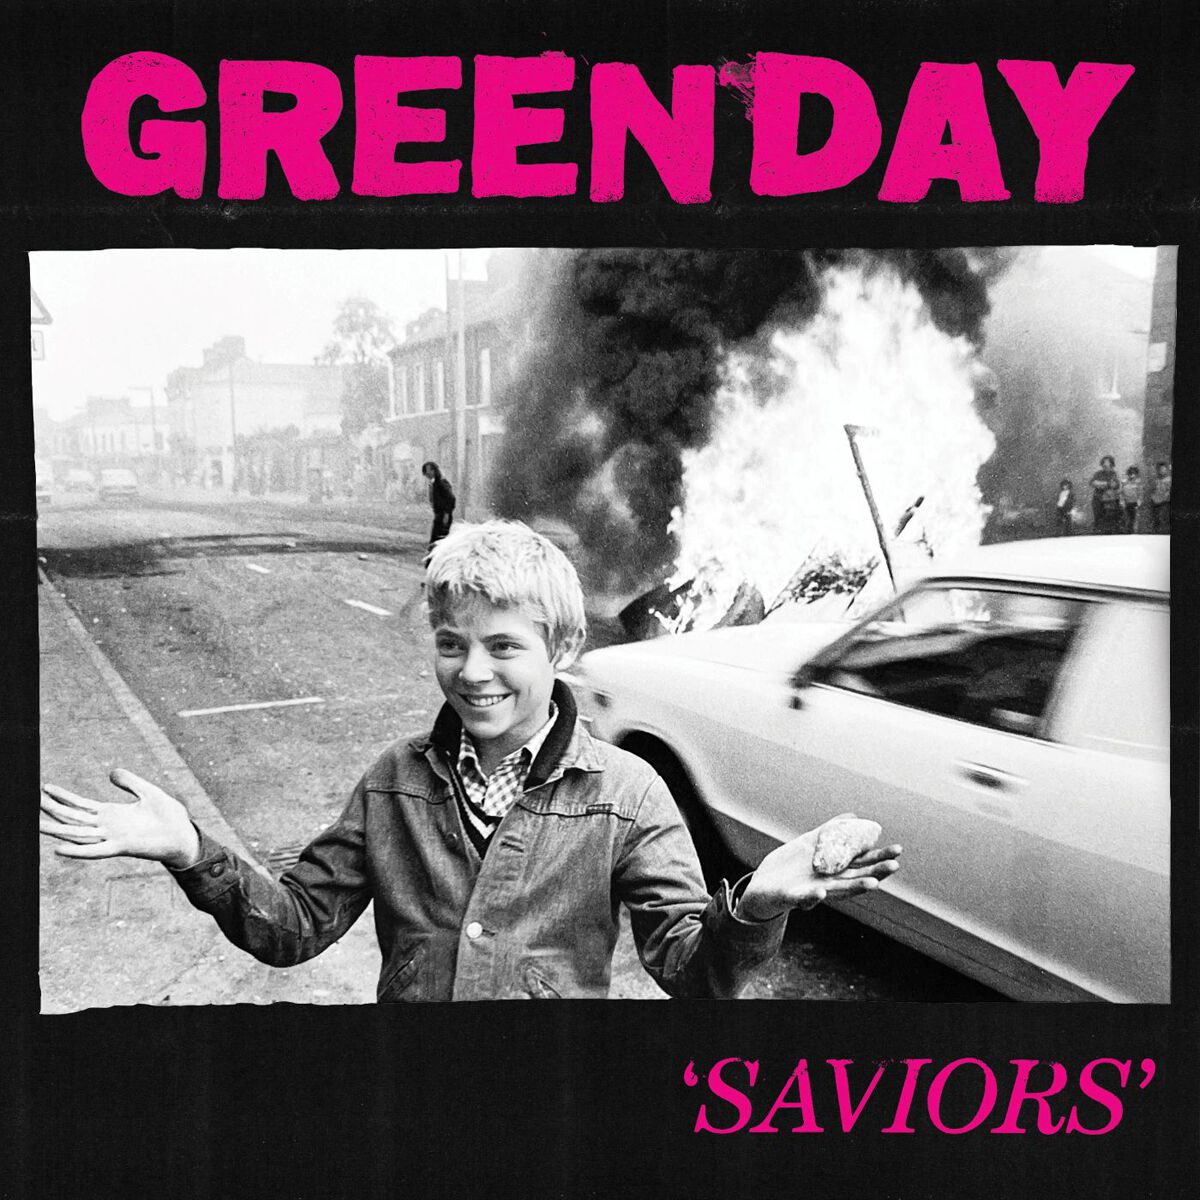 Saviors (vinyl), Green Day, Lp_record, New, Free & Fast Delivery